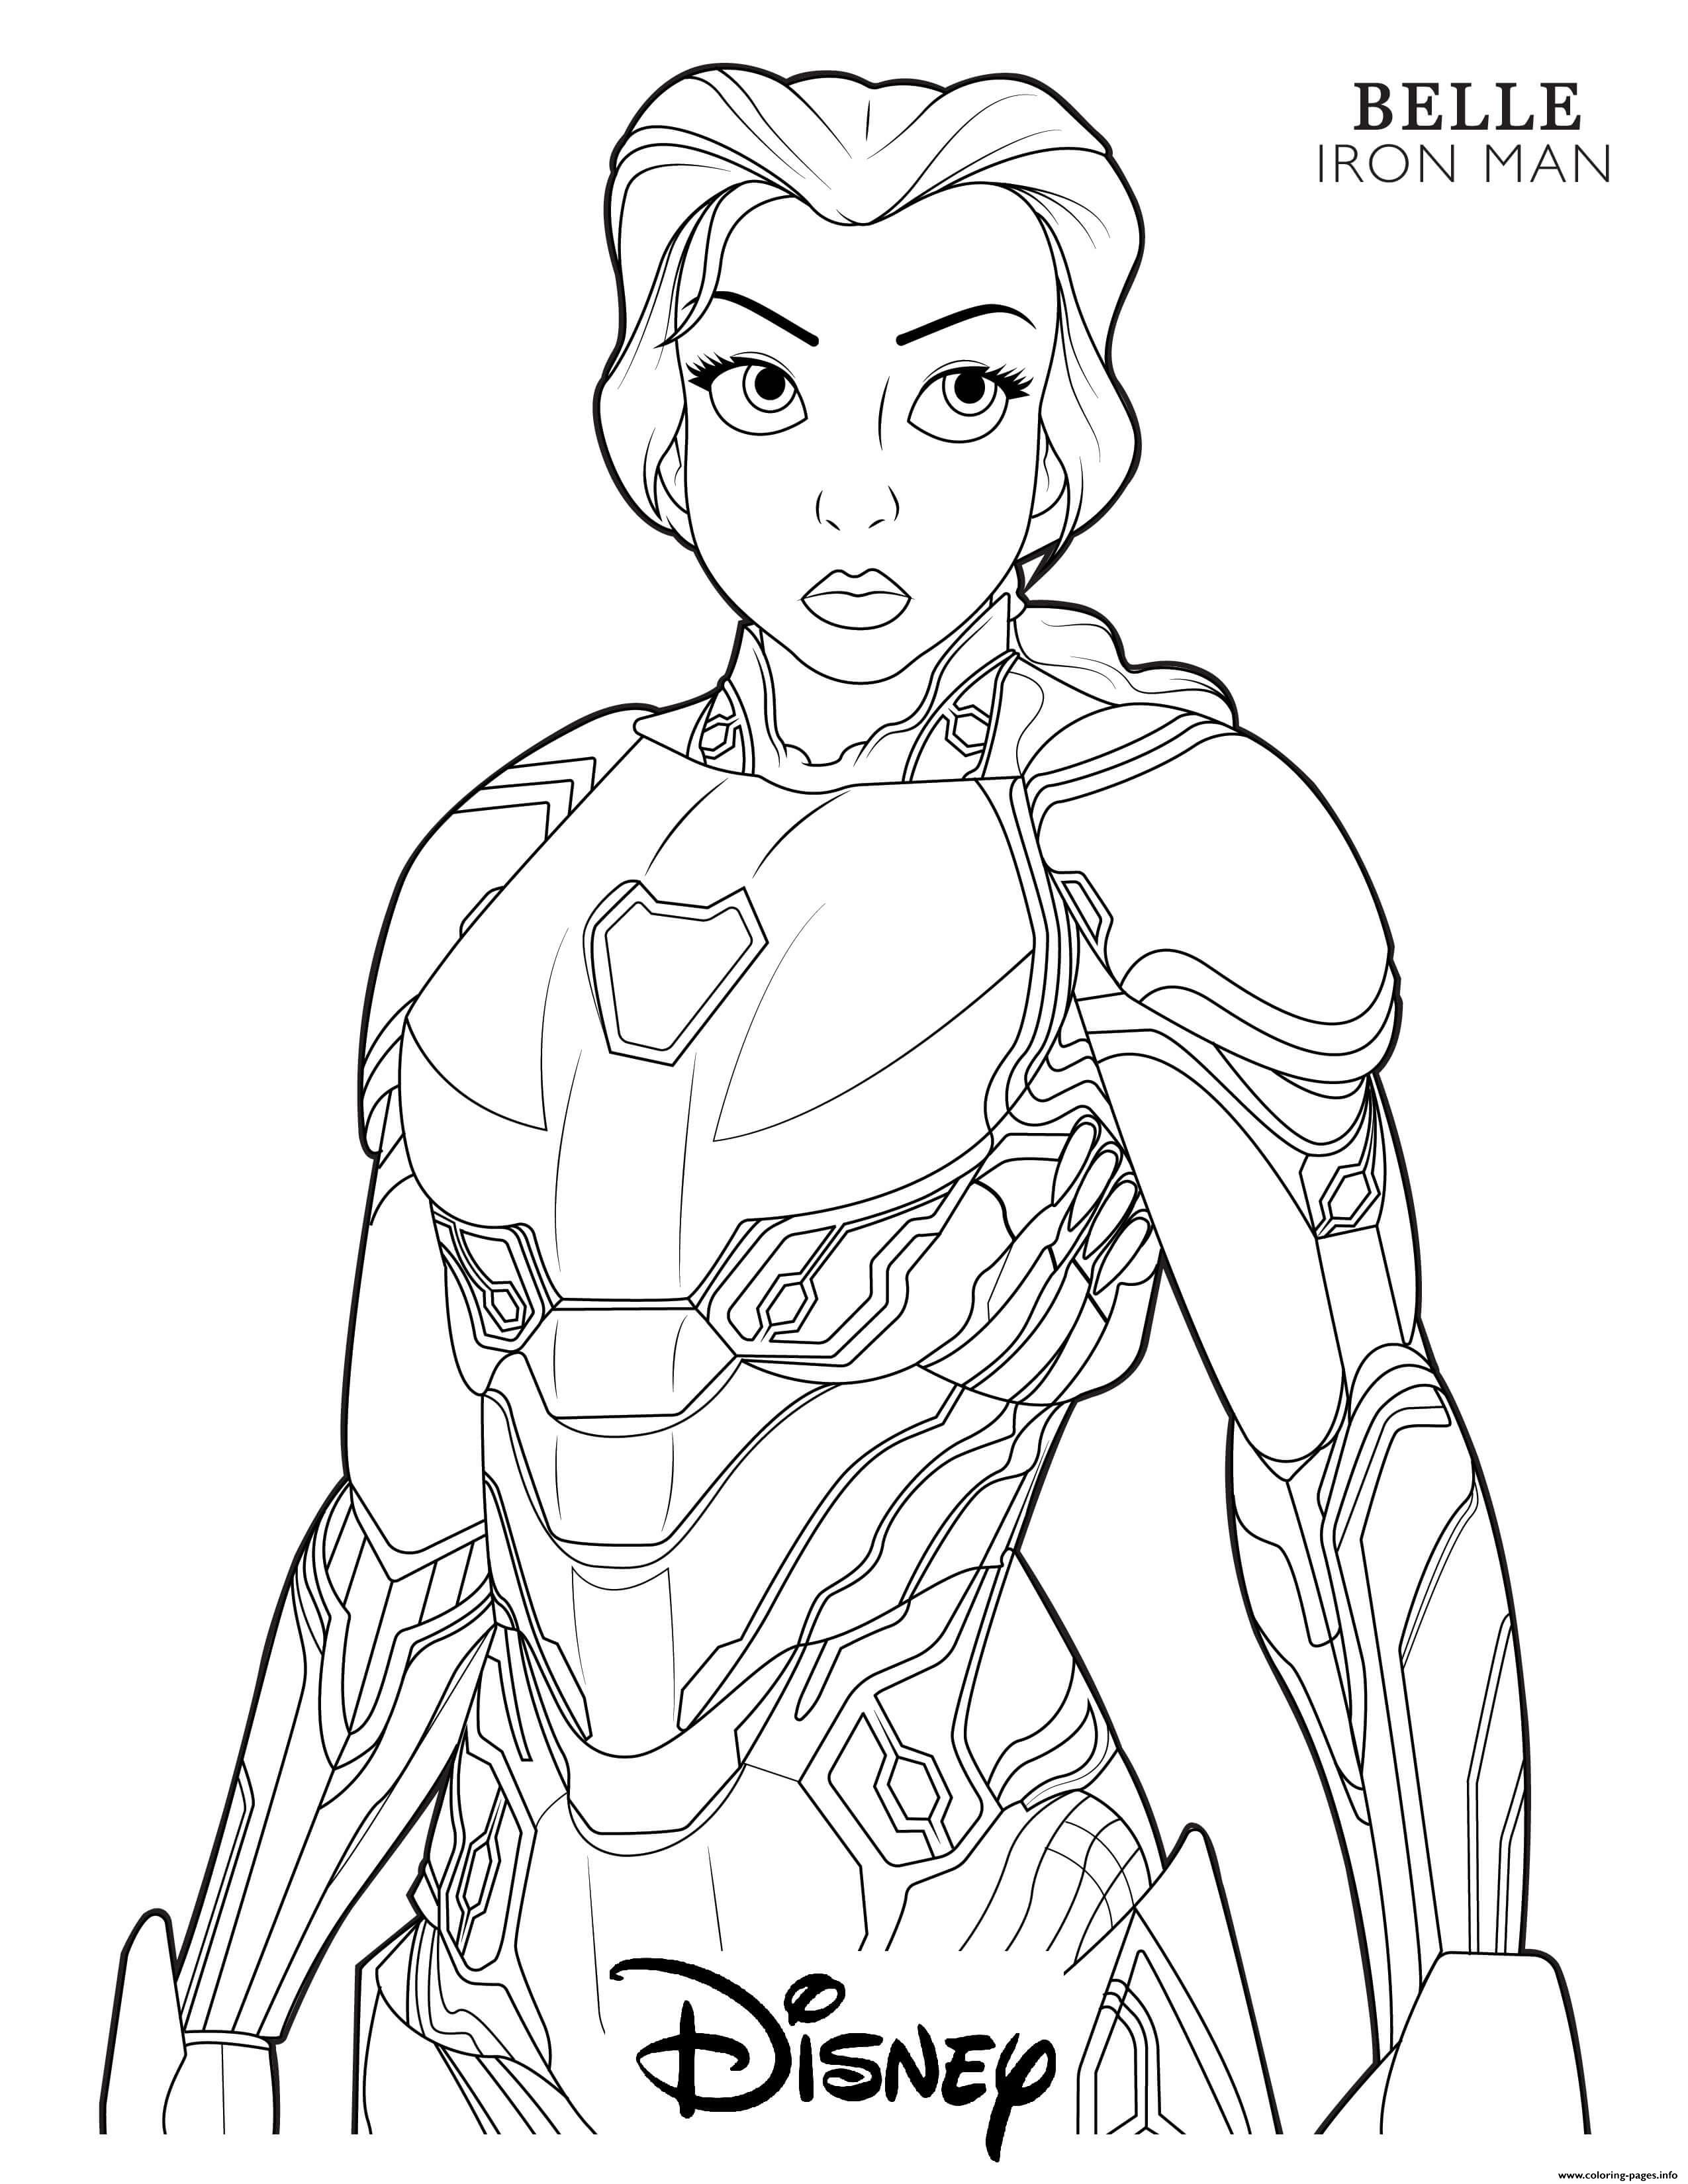 Download Iron Man Belle Disney Avengers Coloring Pages Printable